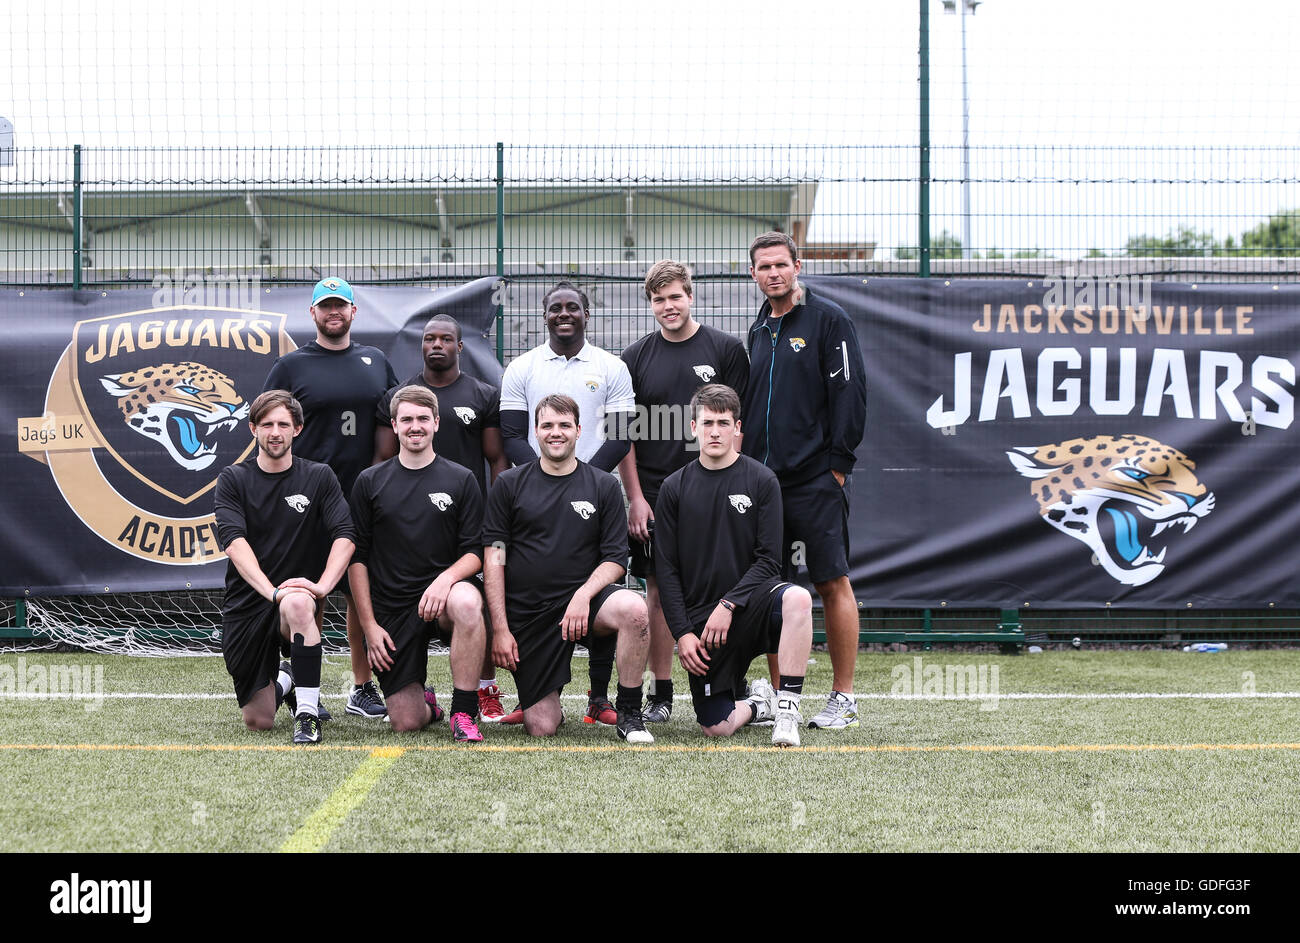 Jacksonville Jaguars assistant defensive line coach Aaron Whitecotton (top row, left) Denard Robinson (top row, centre) and Tony Boselli (top row, right) pose for a photo with students during the Jacksonville Jaguars academy day at Loughborough University. PRESS ASSOCIATION Photo. Picture date: Friday July 15, 2016. Photo credit should read: Barry Coombs/PA Wire Stock Photo